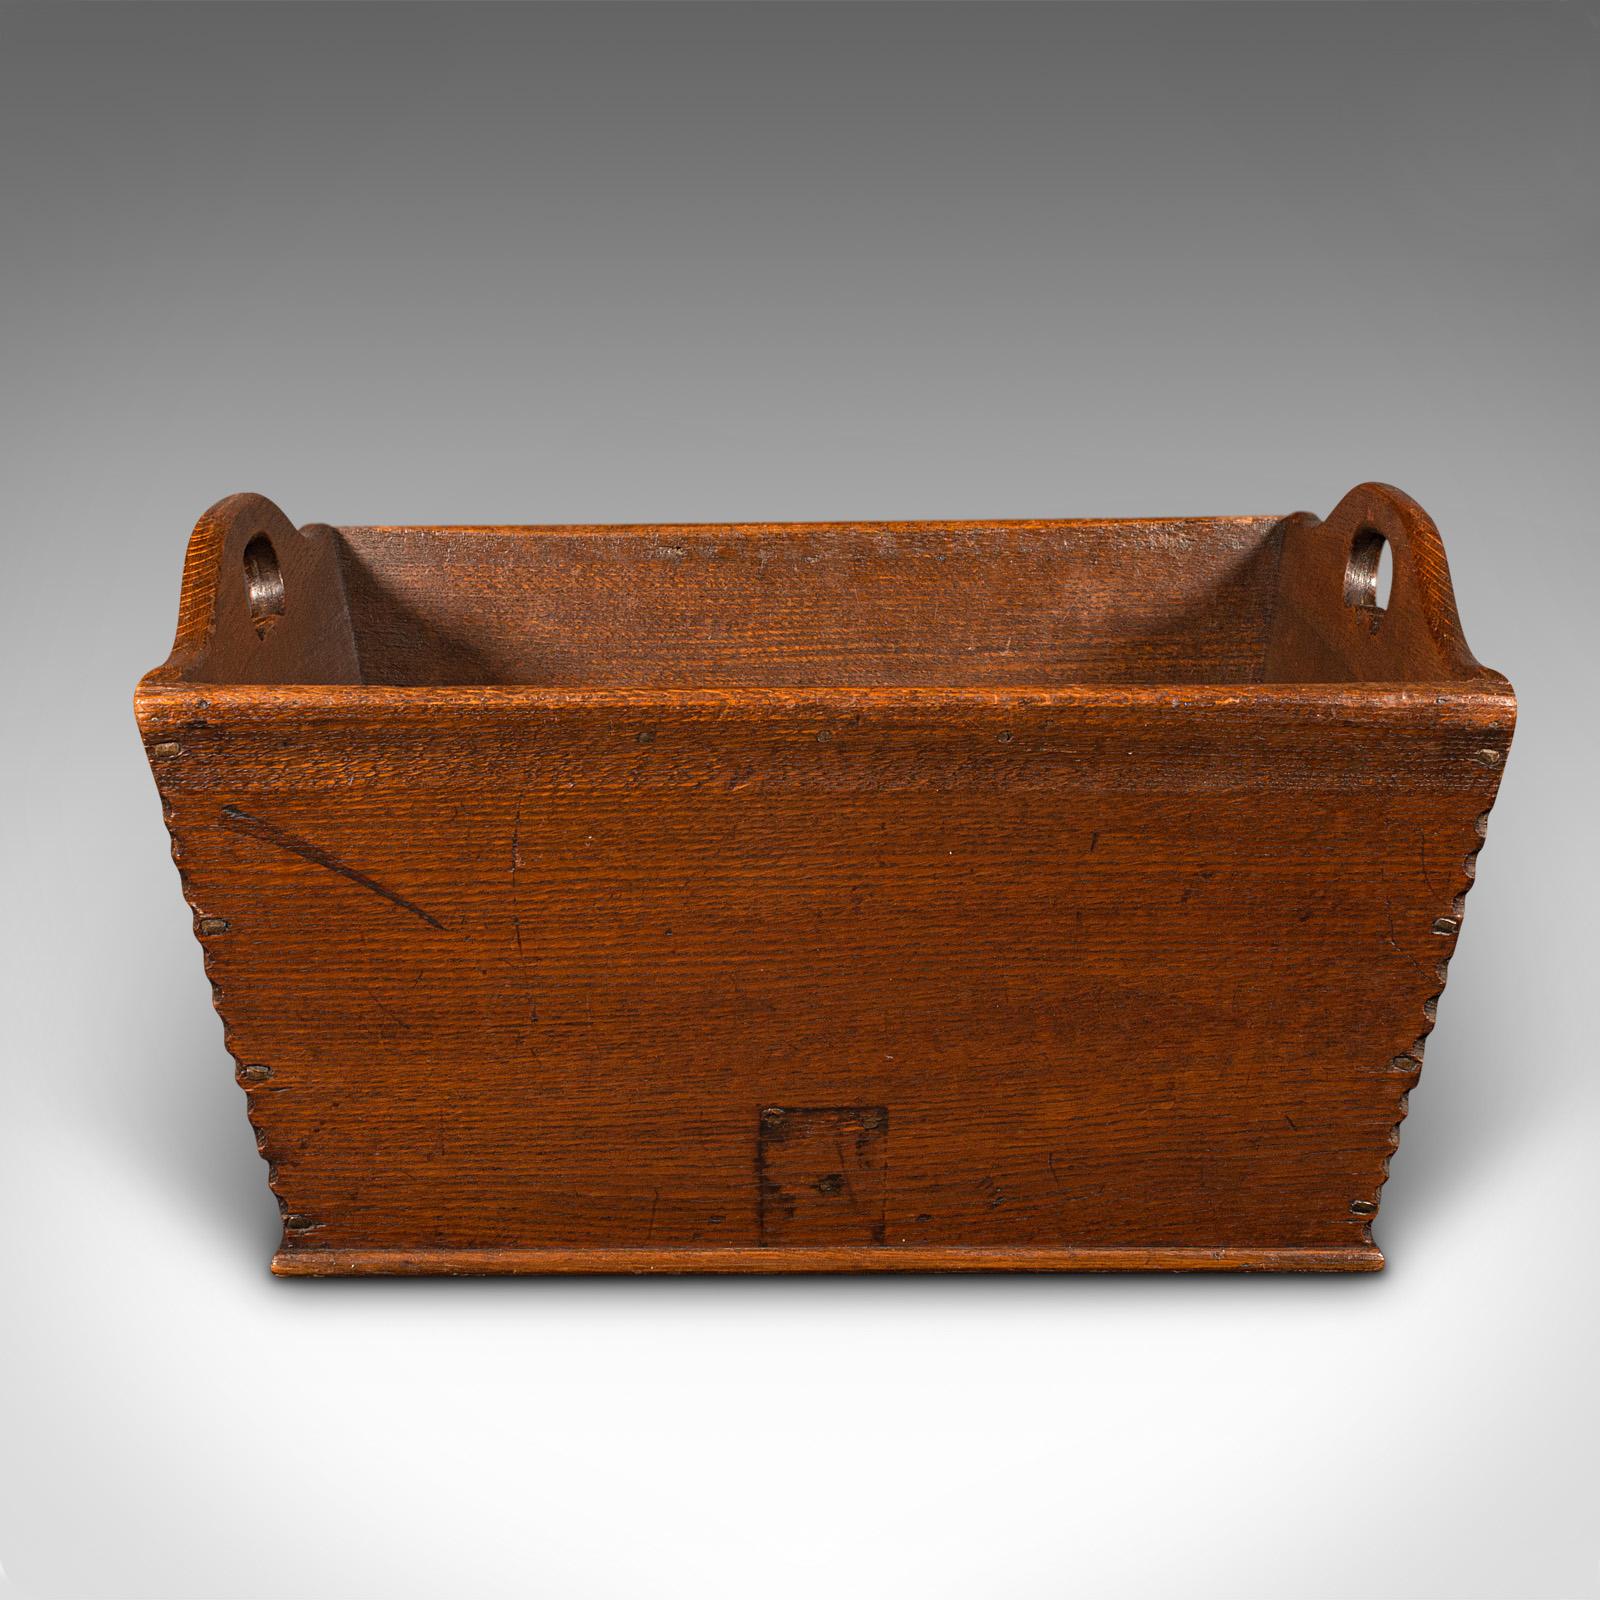 This is an antique cheese carrying box. An English, oak garden produce tray or work box, dating to the Georgian period, circa 1800.

Generously sized box, ideal for carrying large truckles of cheese or garden produce
Displays a desirable aged